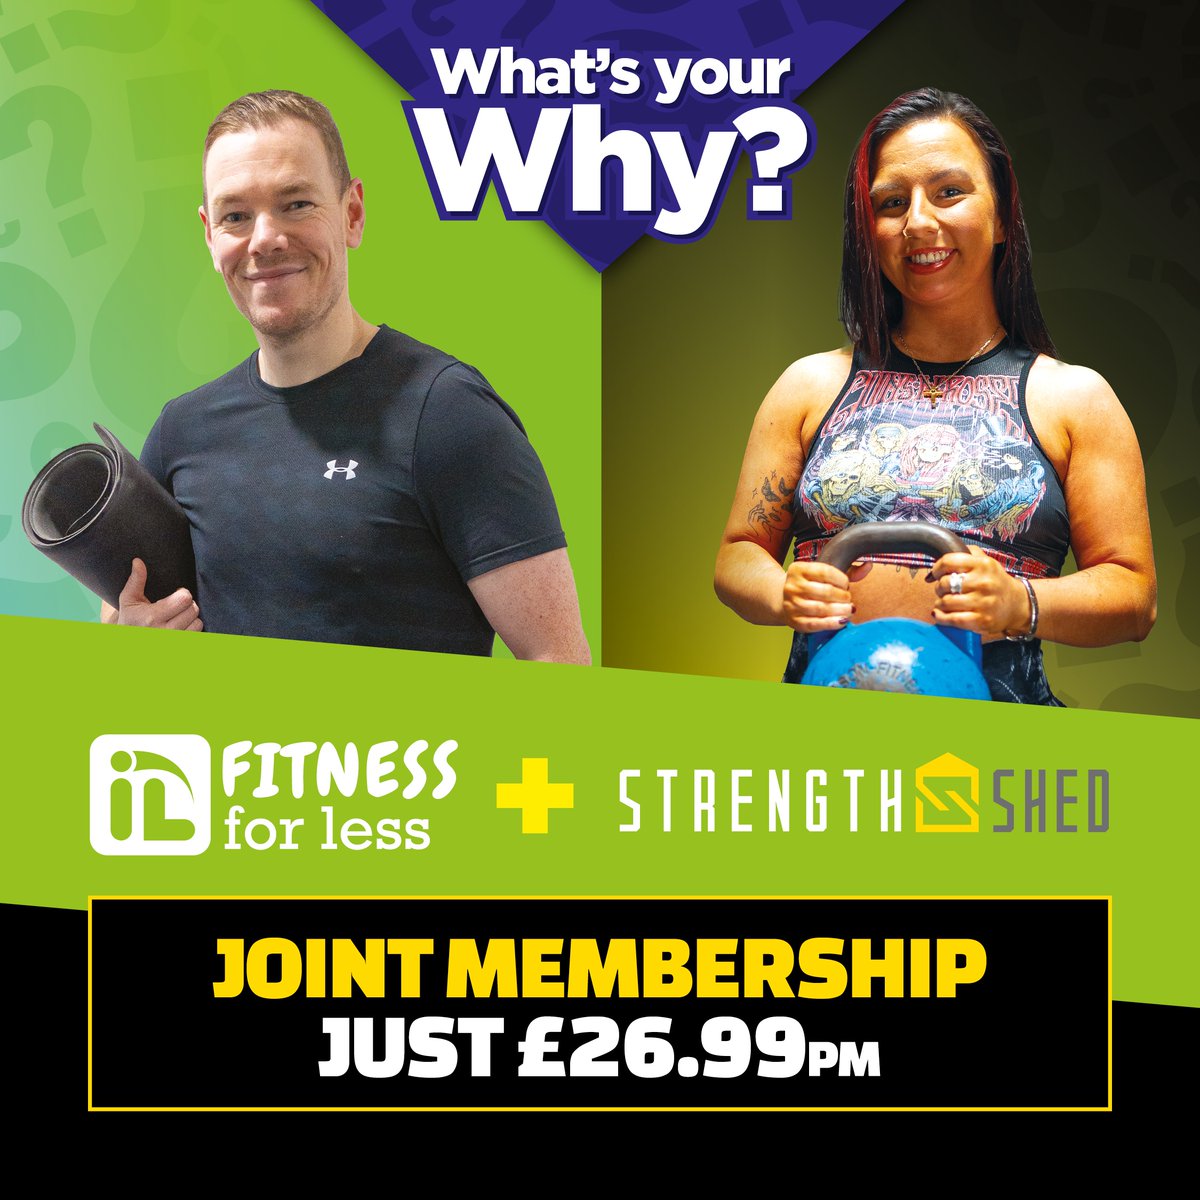 Did you know we offer a joint Strength Shed and Fitness For Less membership? Get the best of both worlds from just £26.99 per month ⬇️ strengthshed.co.uk/join-now/